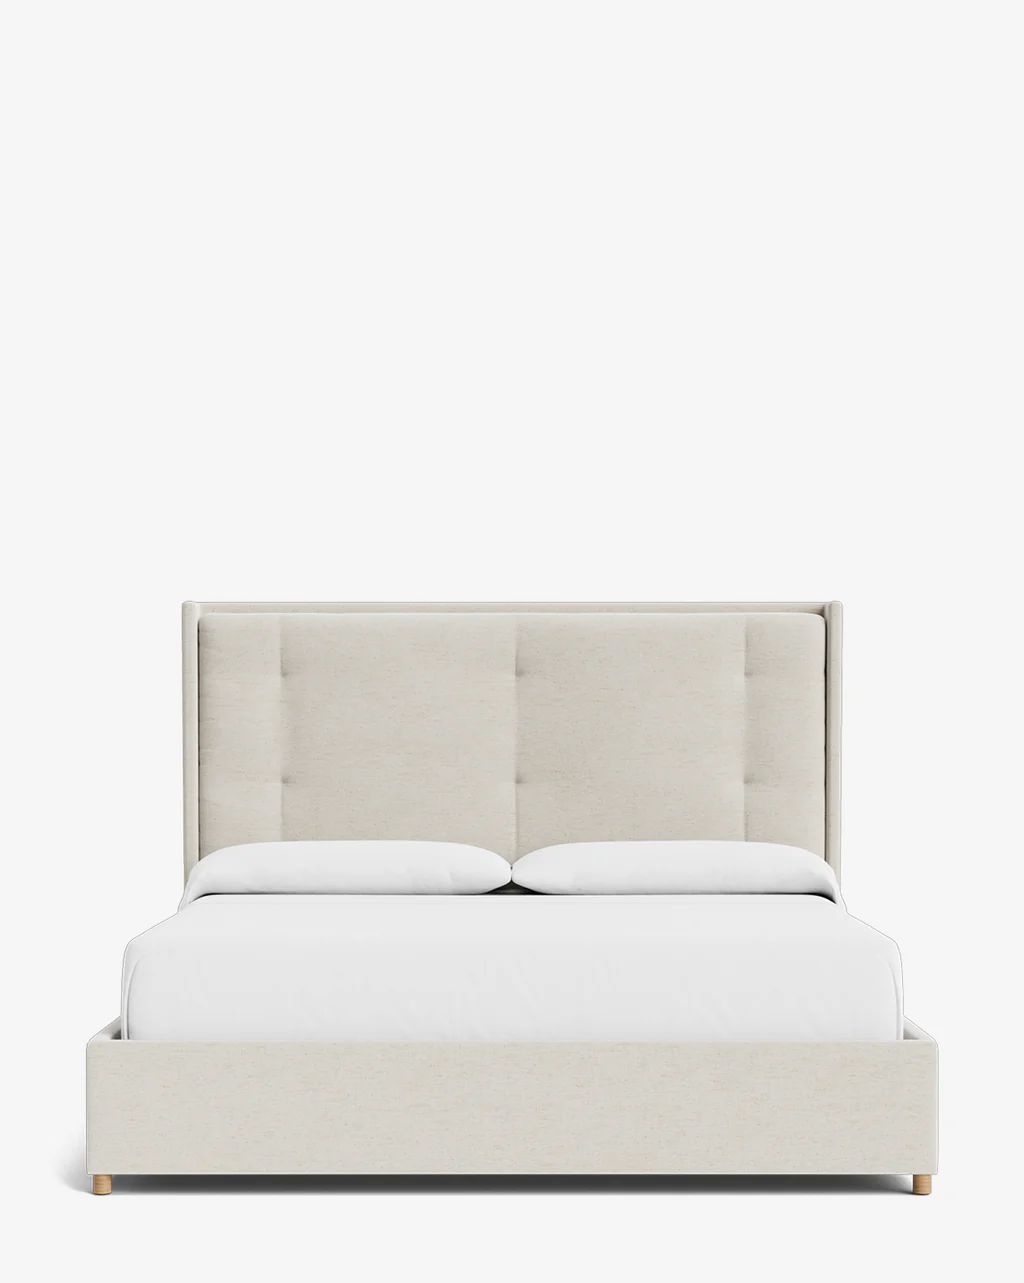 Ria Bed | McGee & Co. (US)